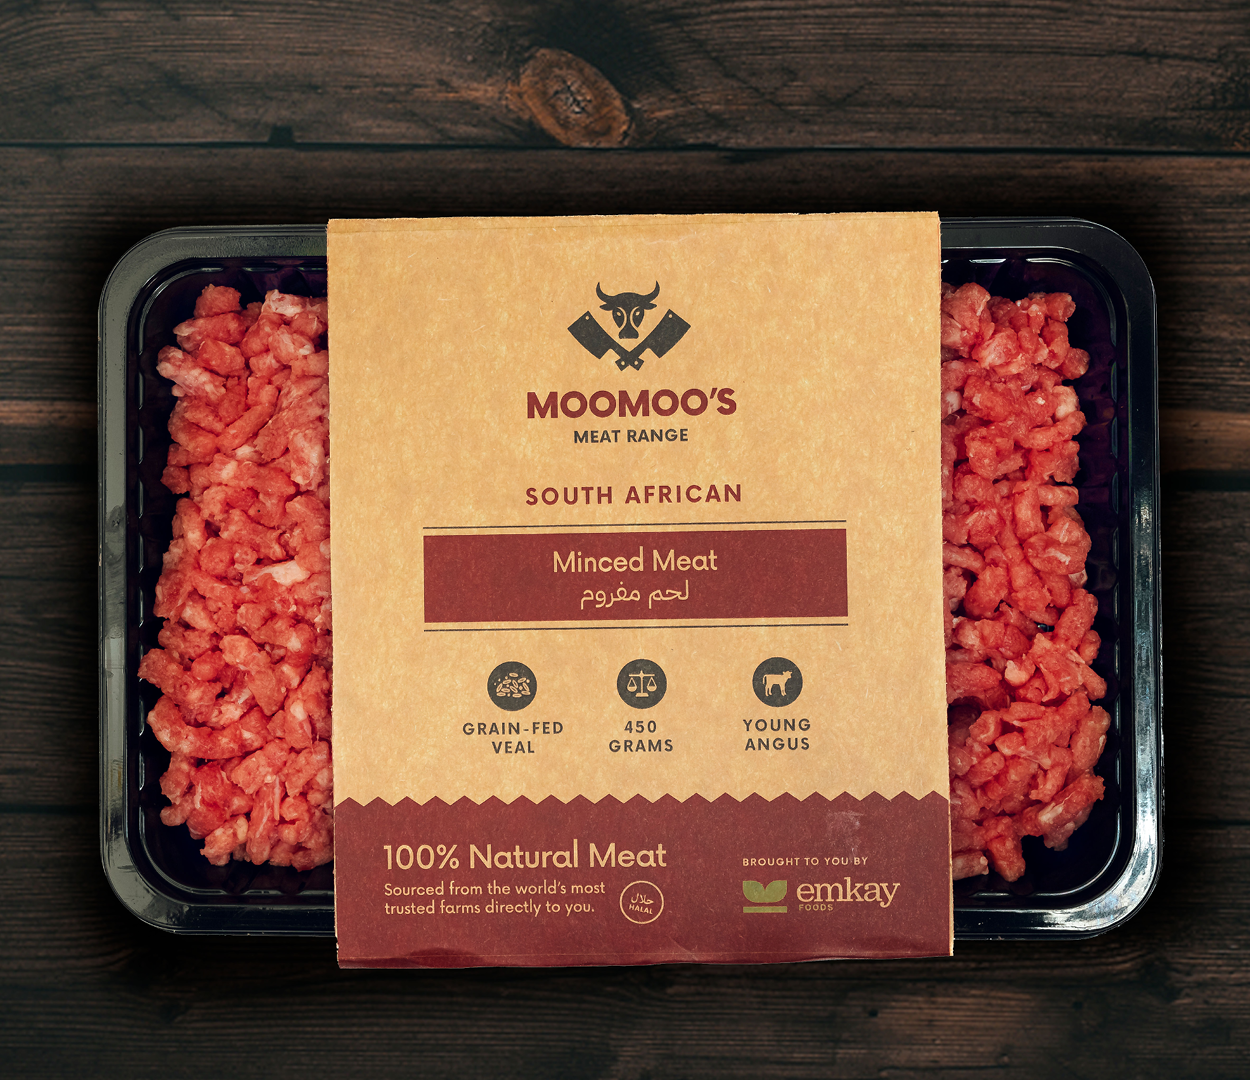 South African Veal | Mince Meat